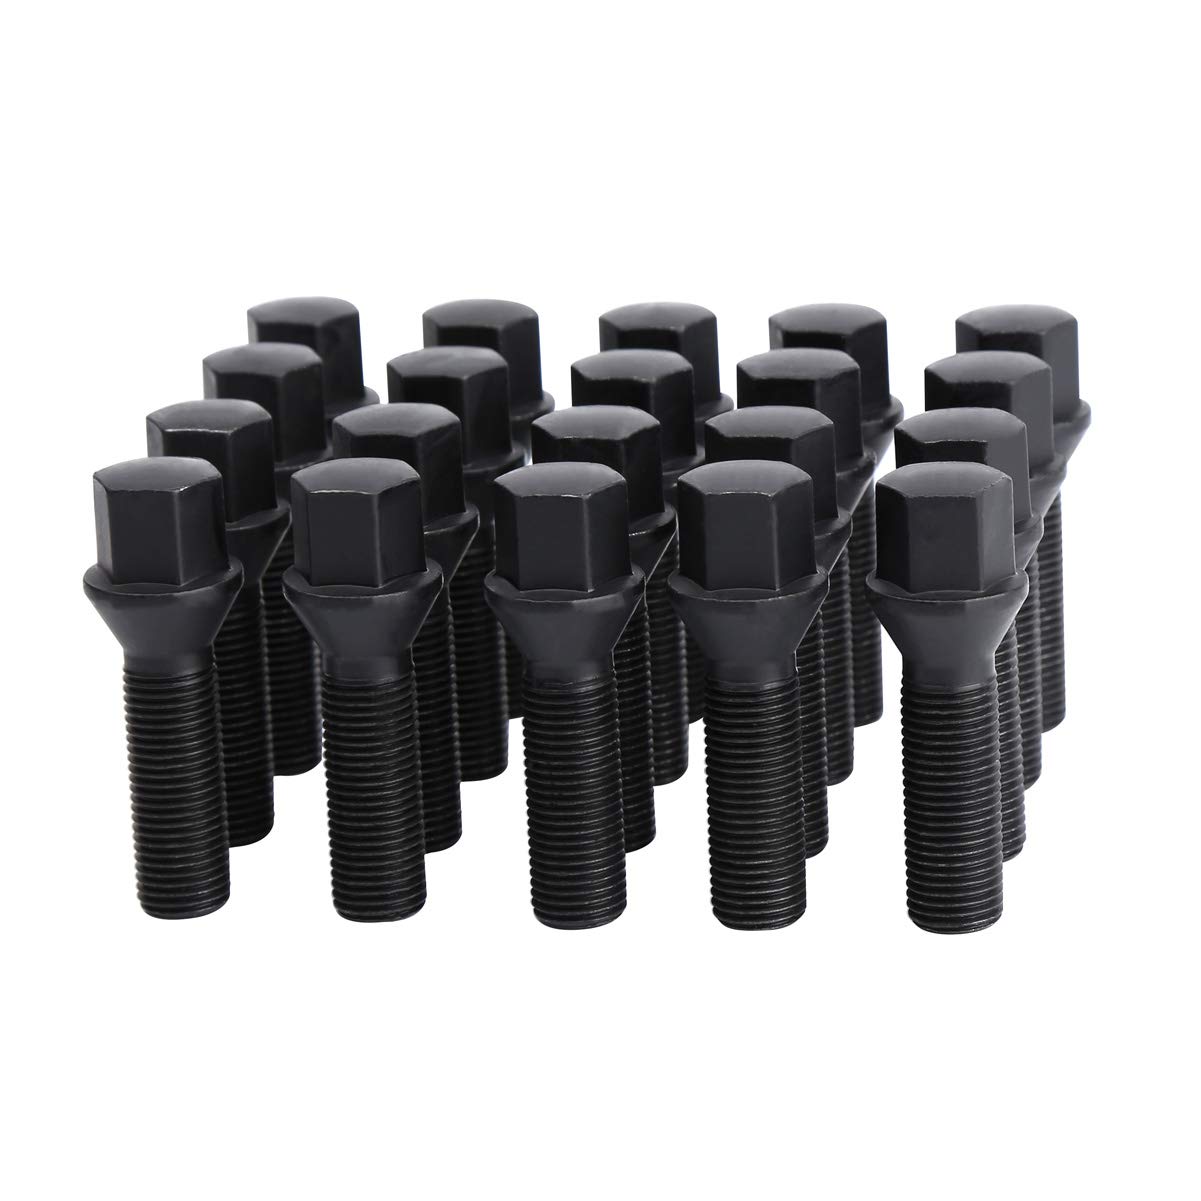 20Pcs 14x1.5 Extended Lug Bolts for BMW Wheel Spacers Conical Seat Lug bolts xccscss.